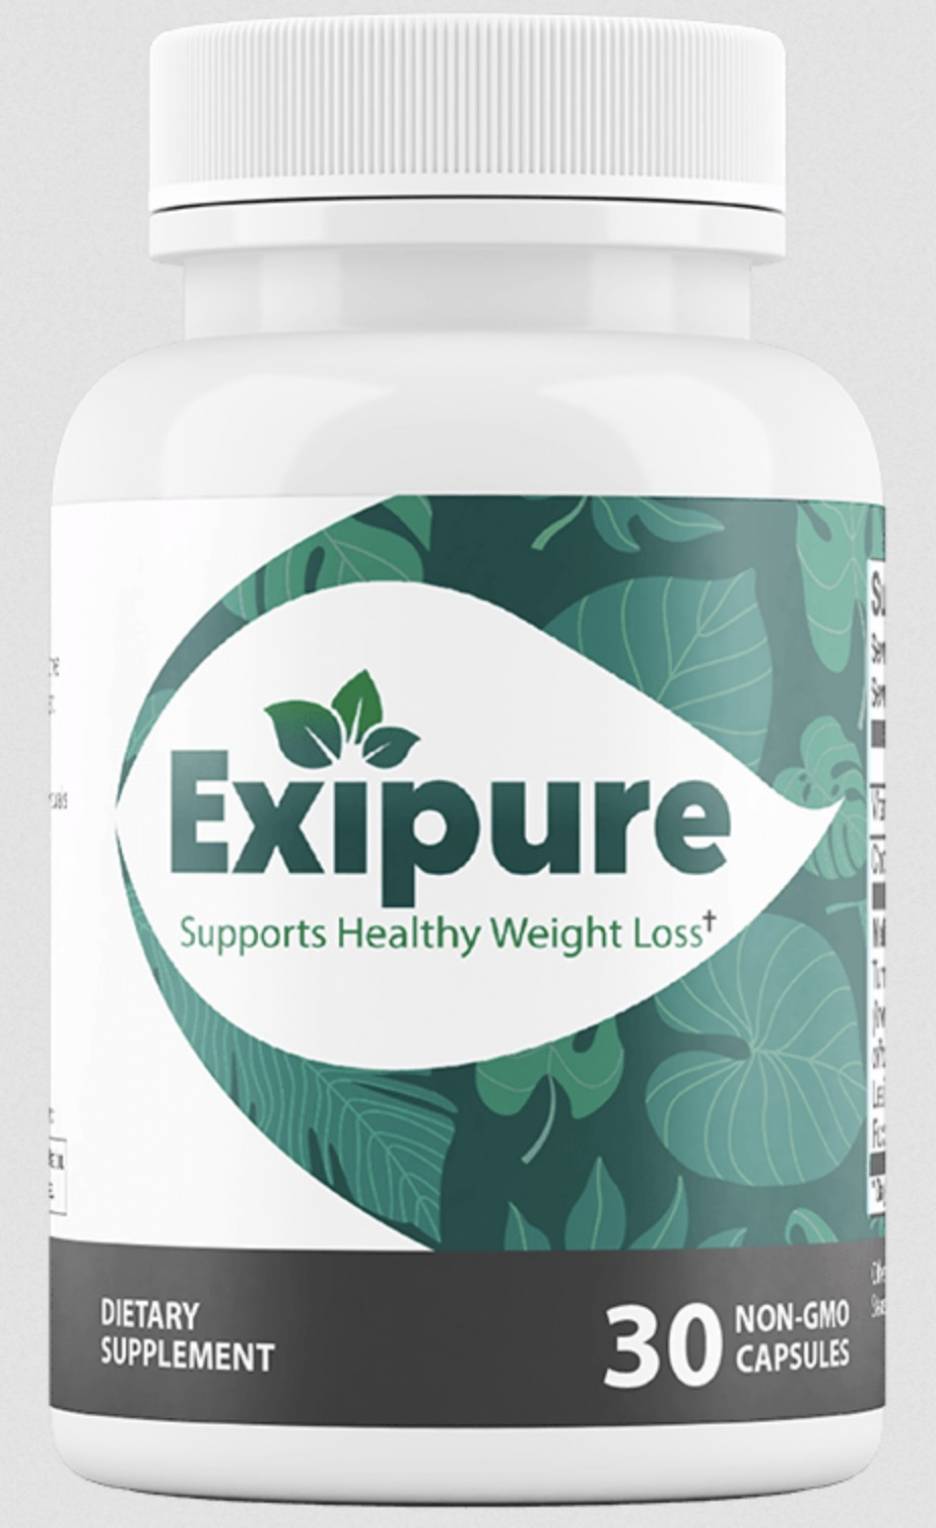 Exipure Reviews And Complaints And Ratings